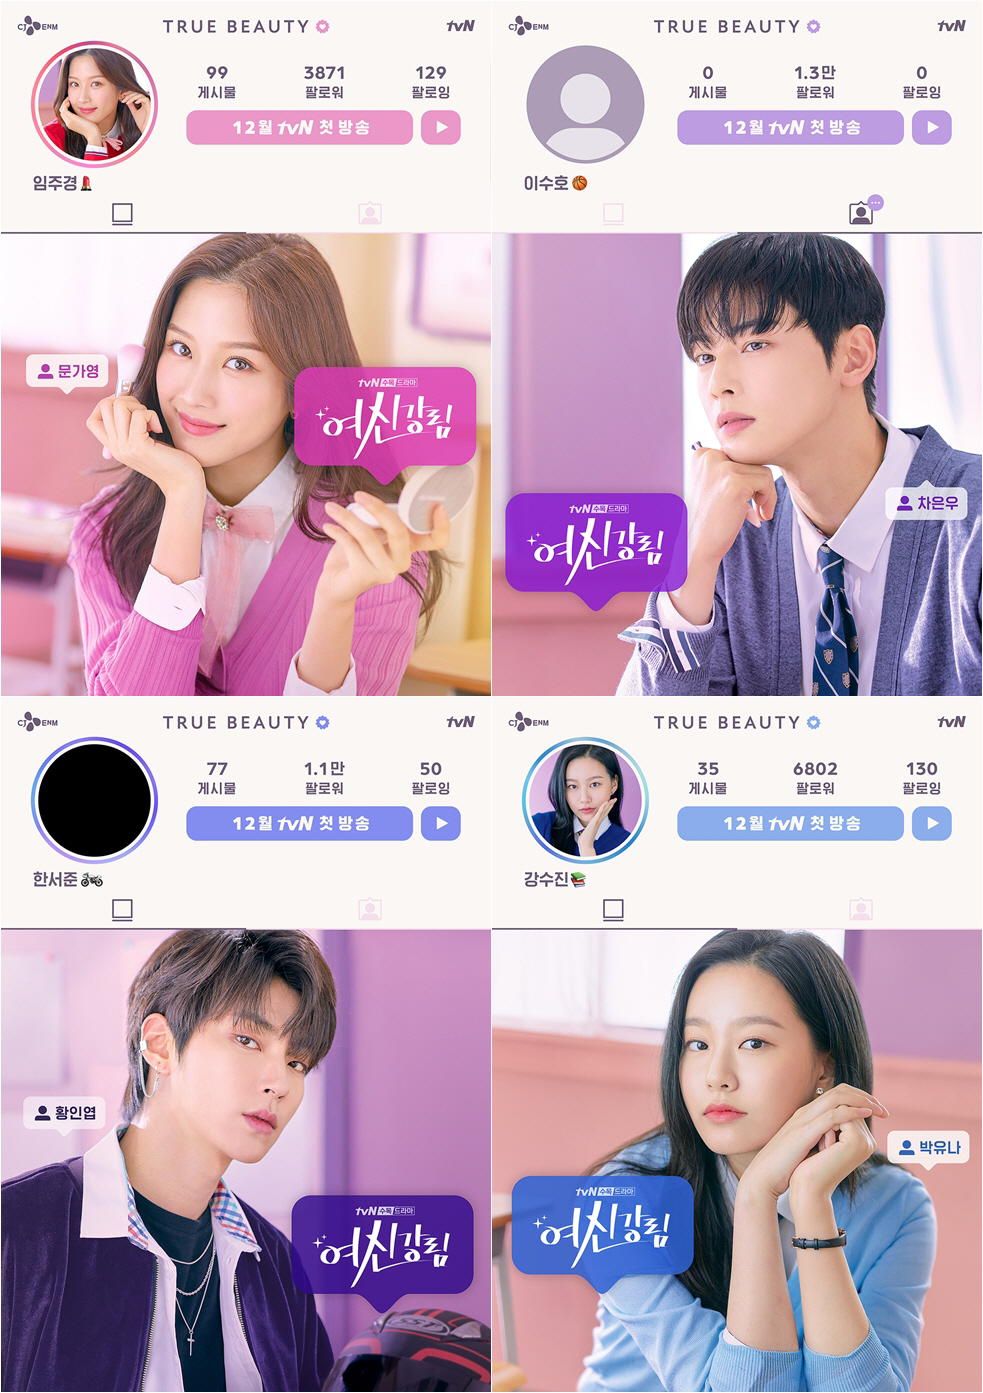 TVN The new Wednesday-Thursday evening drama True Beauty Moon Ga-young, Cha Eun-woo, Hwang In-yeop, Park Yunas character posters are released and attention is focused.In addition, the writer of Meow is a character who achieves a perfect synchro rate with four people in commemoration of the TVN True Beauty broadcast, and draws a special poster directly and captures the attention at once.TVNs new Wednesday-Thursday evening drama True Beauty (directed by Lee Si-euns play, Kim Sang-hyup) is scheduled to be broadcasted in December. It is a romantic comedy that grows by sharing the secrets of each other with Suho, who has a goddess and a mother who has become a goddess through Makeup.Based on Dongmyeongs popular webtoon, which is the most popular ever, director Kim Sang-hyeop, who has been recognized for his sensual performance as a how-to-discovery day, is directing and cheering his fans.Moon Ga-young plays the role of Im Ju-kyung, a makeover goddess who does not want to be seen even if he dies, and Cha Eun-woo plays the role of Suho, a cold-hearted man with selfish genes.In addition, Hwang In-yeop is a rough wild horse with perfect physicality, Seo-joon , and Park Yuna will emit a decomposition chemi as the original new bogo goddess Kang Sue-jin.On the 29th (Thursday), True Beauty will reveal character posters of Moon Ga-young (played by Lim Ju-kyung), Cha Eun-woo (played by Lee Suho), Hwang In-yeop (played by Han Seo-joon), and Park Yuna (played by Kang Sue-jin) to draw attention.The public poster captures the attention of the SNS screen with the personality of Moon Ga-young, Cha Eun-woo, Hwang In-yeop and Park Yuna.Moon Ga-young automatically ascends clowns with bright, fresh goddess visualsWith a makeup tool, I realize that Moon Ga-youngs look, which shines with both eyes, and lipstick emoticons next to his name are immersed in makeup.At the same time, his beauty, which perfectly digests pink cardigans and lace ribbon ties, is admirable.Moreover, Moon Ga-youngs SNS filled with pink light emits infinite charm of the drama and raises expectations for his performance.Cha Eun-woo captures her gaze with sculptural visuals and chic eyes.In addition, a neatly filled shirt, tie, and cardigan make you feel the model force.Especially in 0 posts, his SNS, which boasts 1.3 million Followers even though it is 0 followers, makes his mouth open.So, the expectation of Cha Eun-woos charm is soaring as a perfect man who does not give a second to other people in the play, and is divided into a top class from visual to academic achievement.In the meantime, Hwang In-yeop attracts attention with its rough charm.The combination of a defiant look, piercing, necklace, and untied shirts, with sleek eyes, makes the viewers fall into a hurry.Along with this, the helmet and bike emoticons in the picture make Hwang In-yeop feel the bike love, doubling the macho charm.Moreover, the number of 1.1 million followers realizes his popularity and raises his interest in the charm of Hwang In-yeop, which will be paired with Cha Eun-woo.Park Yuna, along with her charms, draws attention to her, and her eyes and smileless expressions make her feel for the chic character.At the same time, Park Yunas clear and clean visuals, which digest the light blue cardigan, keep the eye out.So the charm of Park Yuna in the play and the expectation of visual chemistry to be disassembled into Moon Ga-young and best friend are heightened.Above all, the poster of the character of the webtoon version, which was written by the author of True Beauty, is released together and steals the attention.The characters that resemble Moon Ga-young, Cha Eun-woo, Hwang In-yeop, and Park Yuna catch the eye, and the modifier Web torn man and woman makes the combination of those who are more hopeful.As such, the True Beauty character poster attracts attention with the visuals of the four people who ripped the webtoon and their different personality.Therefore, interest in True Beauty, which will be filled with the stories of four people who raise expectations vertically by character poster alone, is getting more and more attention.On the other hand, tvNs new Wednesday-Thursday evening drama True Beauty is based on the writers Dongmyeong webtoon.Since the launch of the series in 2018 on Naver Webtoon, it has been ranked # 1 in the female reader rankings, and it is a global hit that has gained popularity in the US, Japan, France and Southeast Asia.Im Ju-kyung, an ordinary high school girl, is confident in her makeup and finds love and dreams. She is attracted to the sympathy and love of her teenage twenties around the world by portraying the triangular romance of three young people, Ju-kyung, Suho and Seo-joon.Sweet romantic comedy tvN new Wednesday-Thursday evening drama True Beauty will be broadcasted in December.